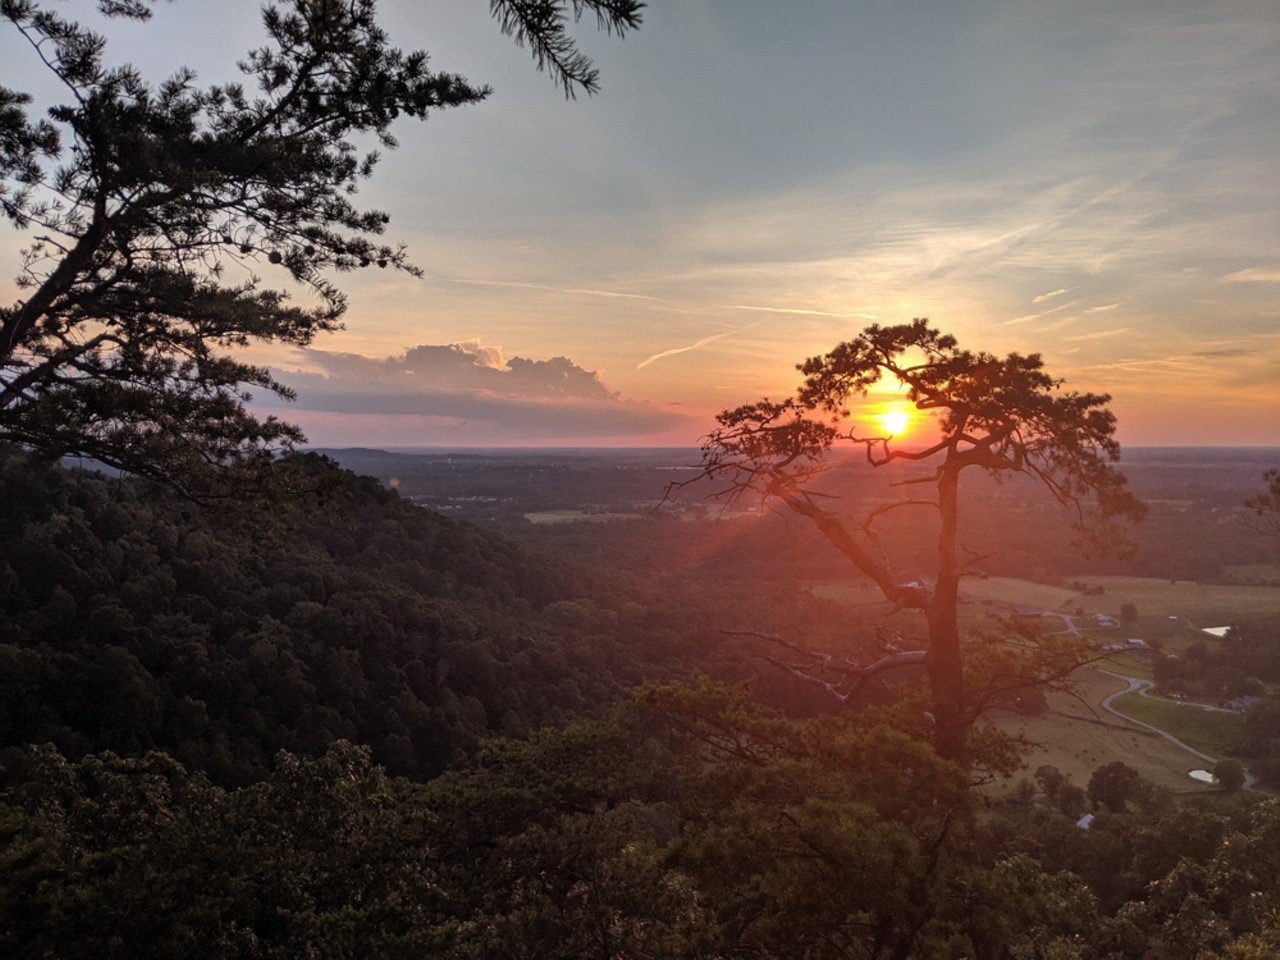 The Pinnacles
2047 Big Hill Road, Berea, KY
Hiker/YouTuber Mike Bucayu recommends this series of trails, several of which have peaks with stunning views. Outside Magazine listed The Pinnacles in the article "The Best Hike in Every State" in 2019.